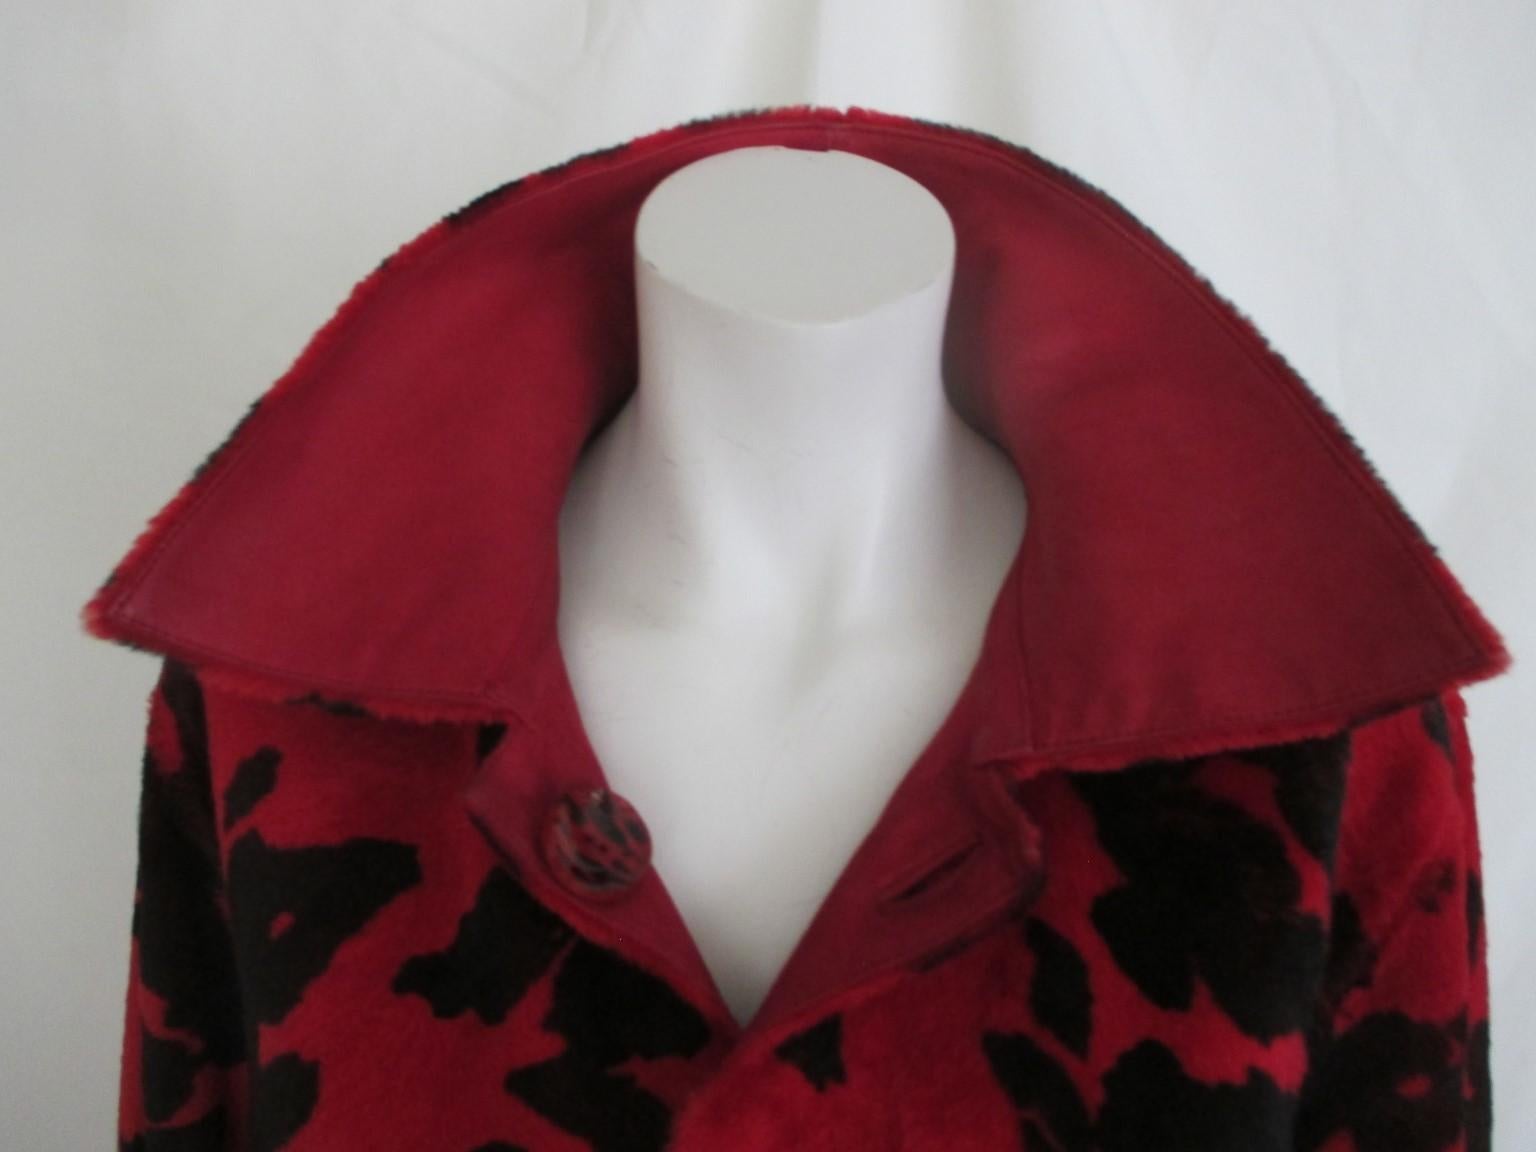 Reversible vintage red/black printed Leather lamb skin coat 

We offer more exclusive leather and fur items, view our front store

Details:
Reversible, one side printed suede lamb skin and one side leather skin 
2 pockets at 2 sides, 3 buttons at 2